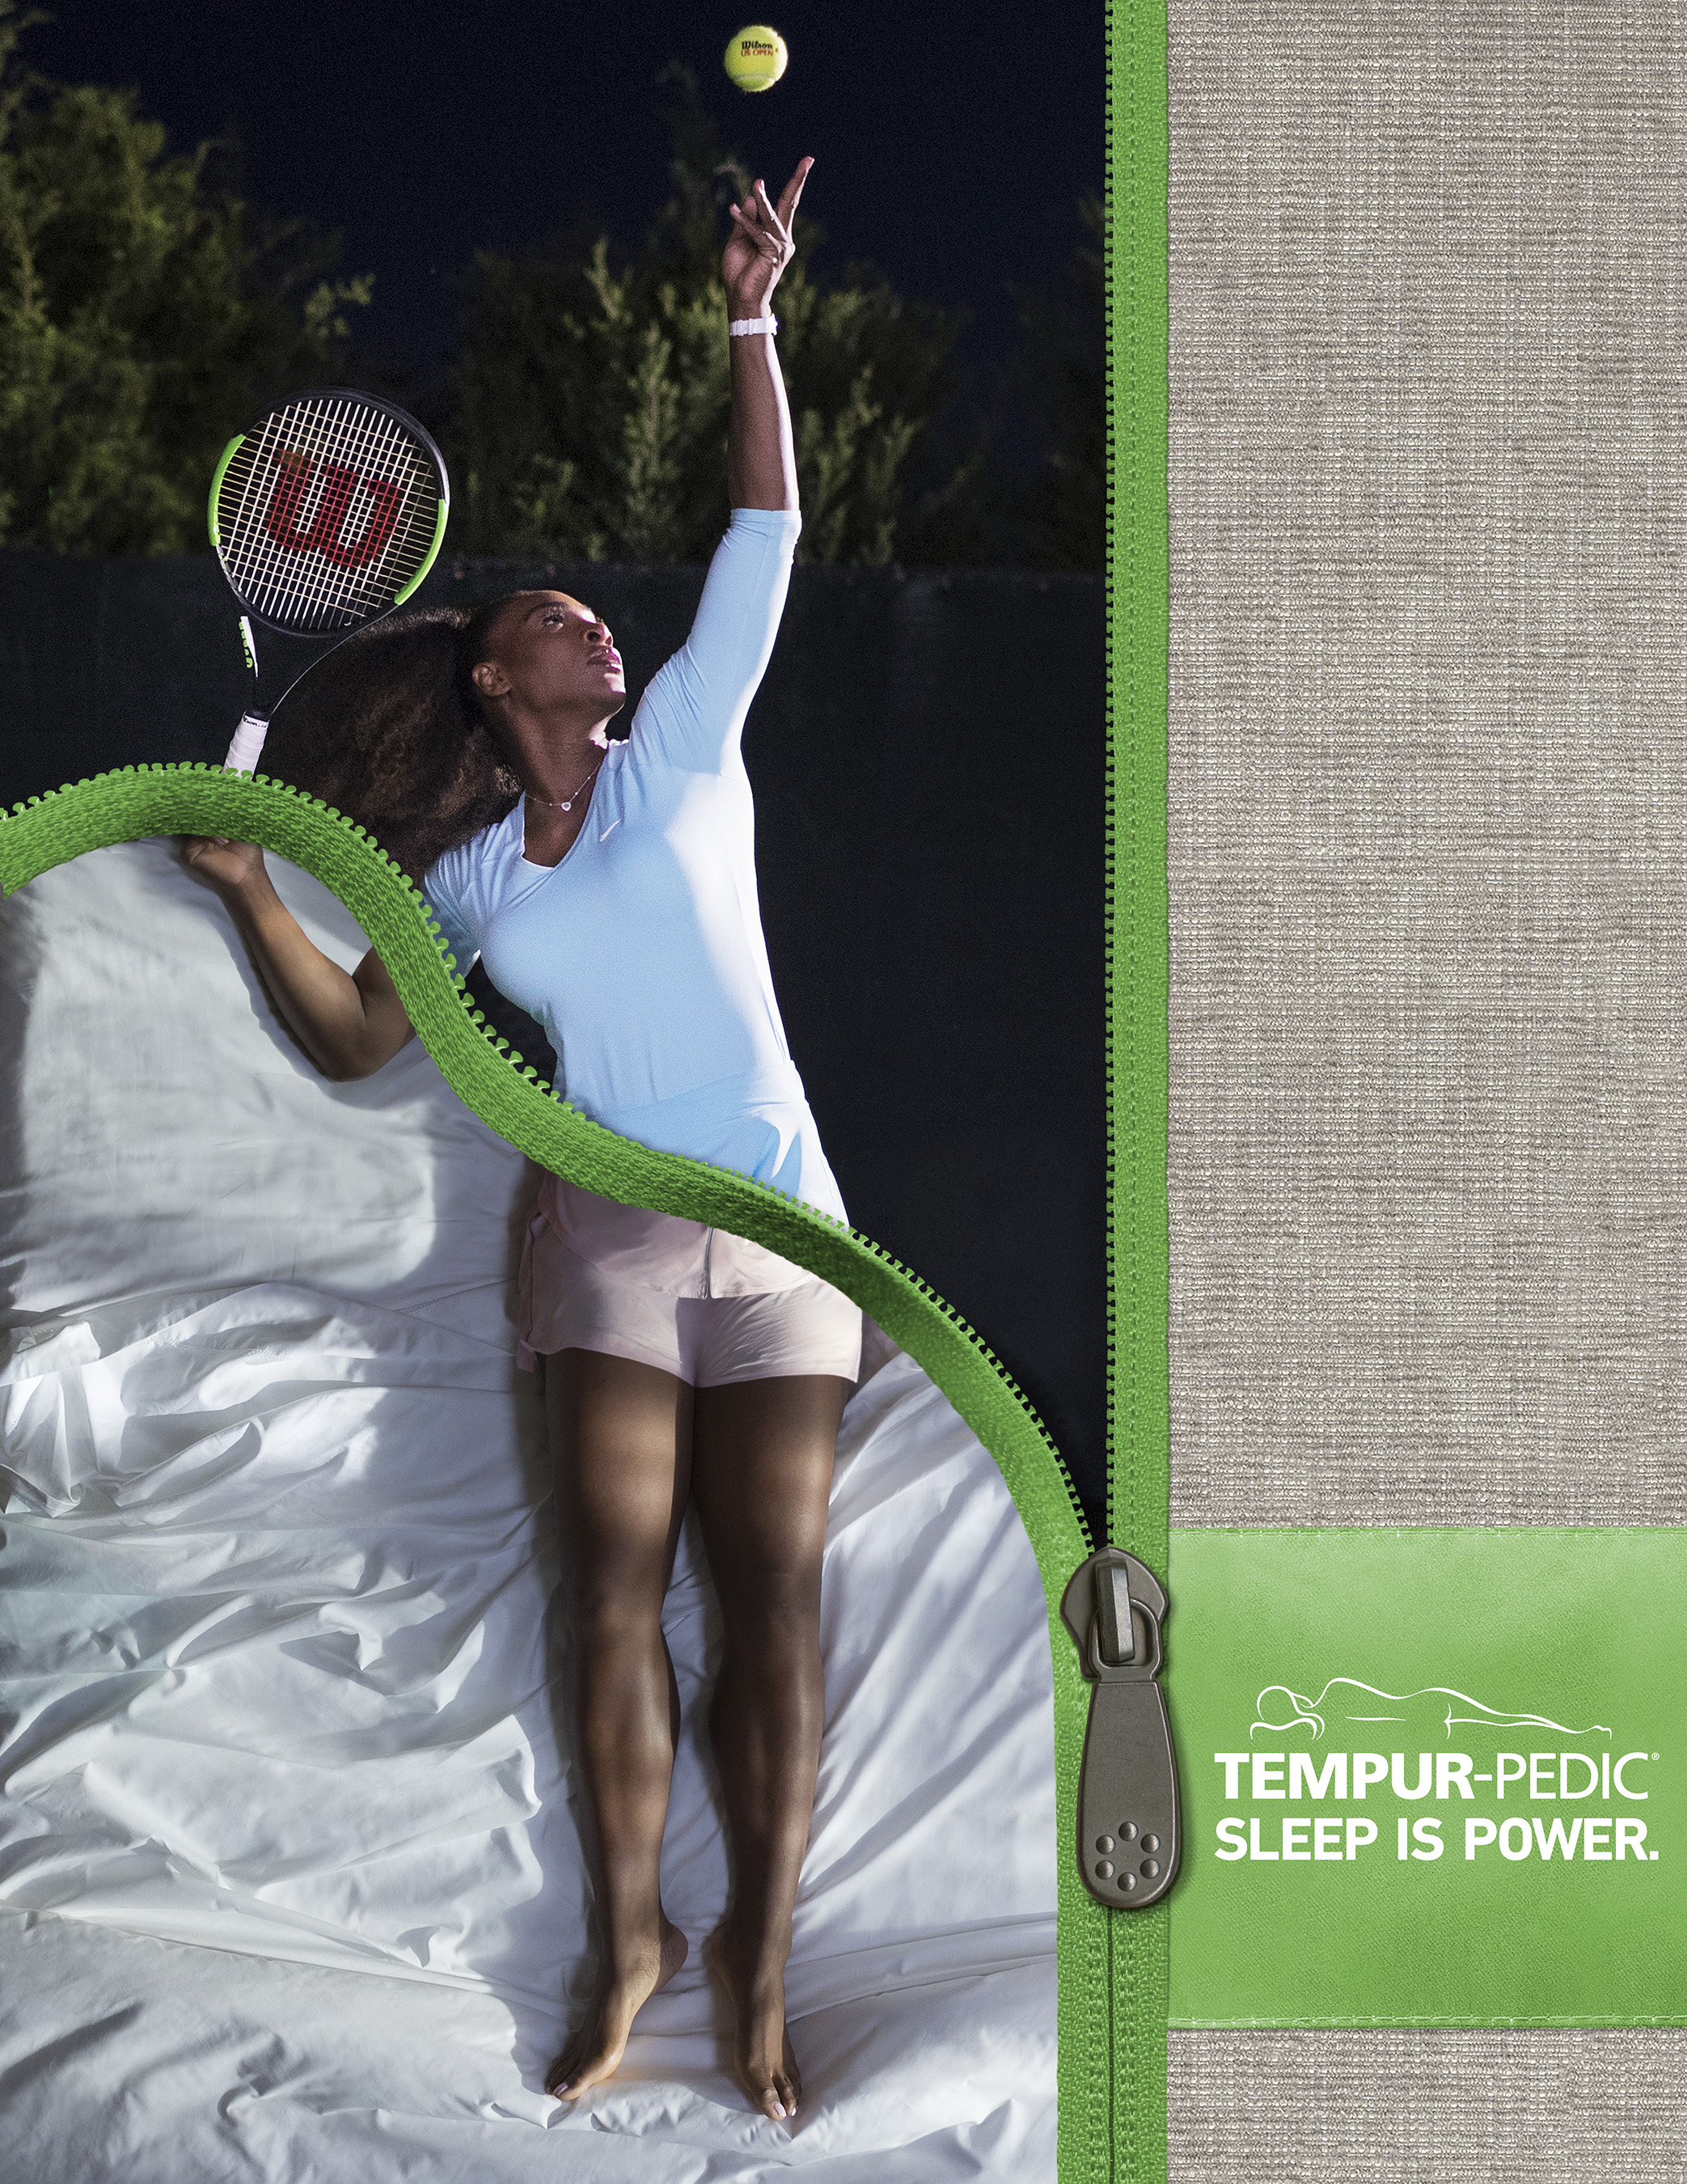 Serena Williams, in collaboration with Tempur-Pedic as part of the brand's new integrated marketing campaign, will be featured in television and digital advertising that begin rolling out in May in the United States, Canada and some international markets, including the UK, France, Germany, Netherlands and Australia.